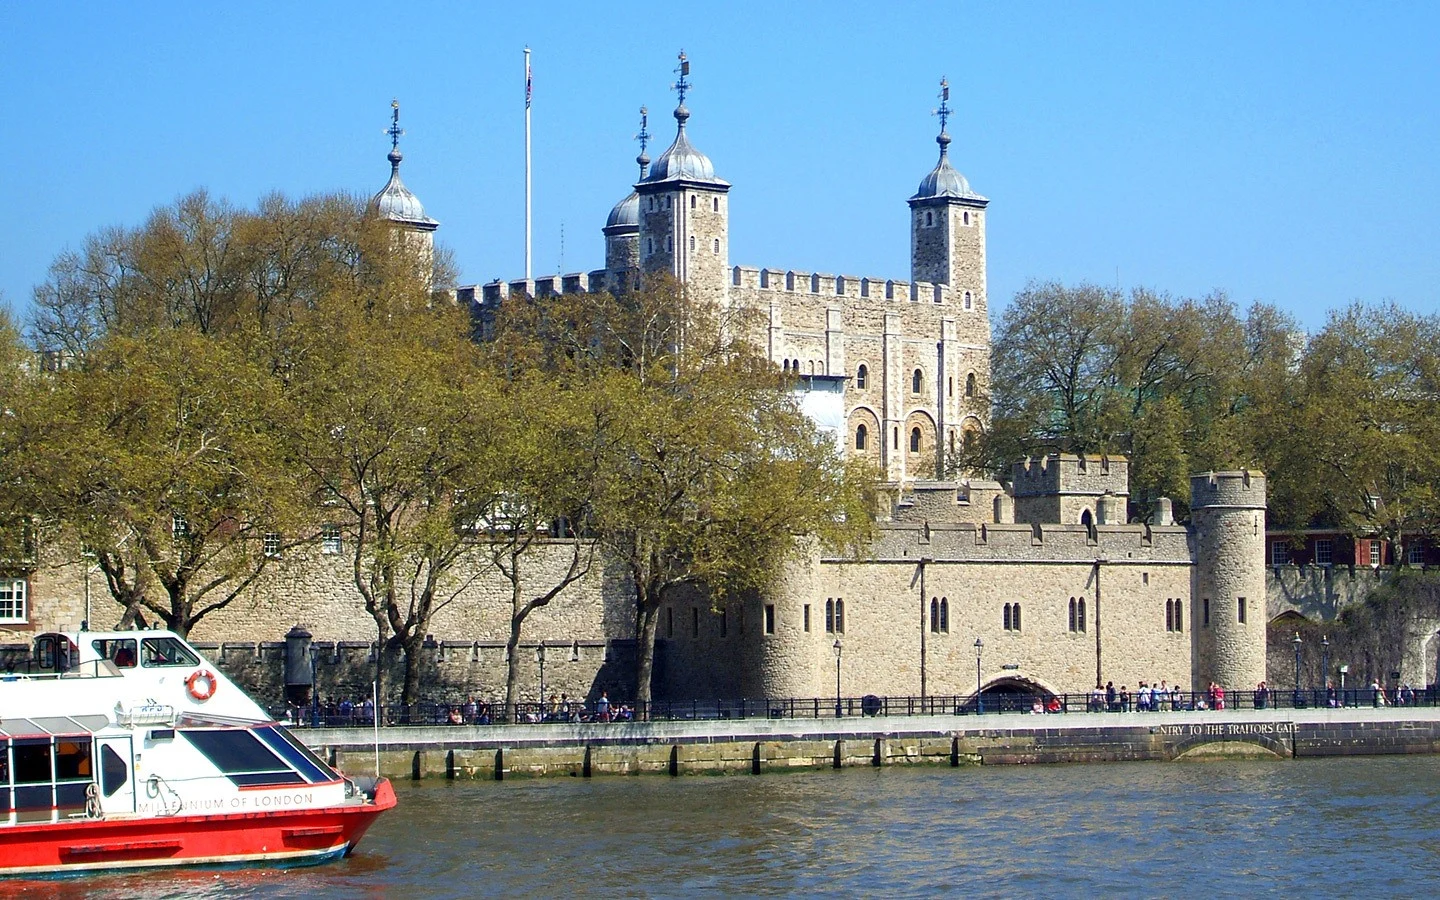 Boat trip past the Tower of London